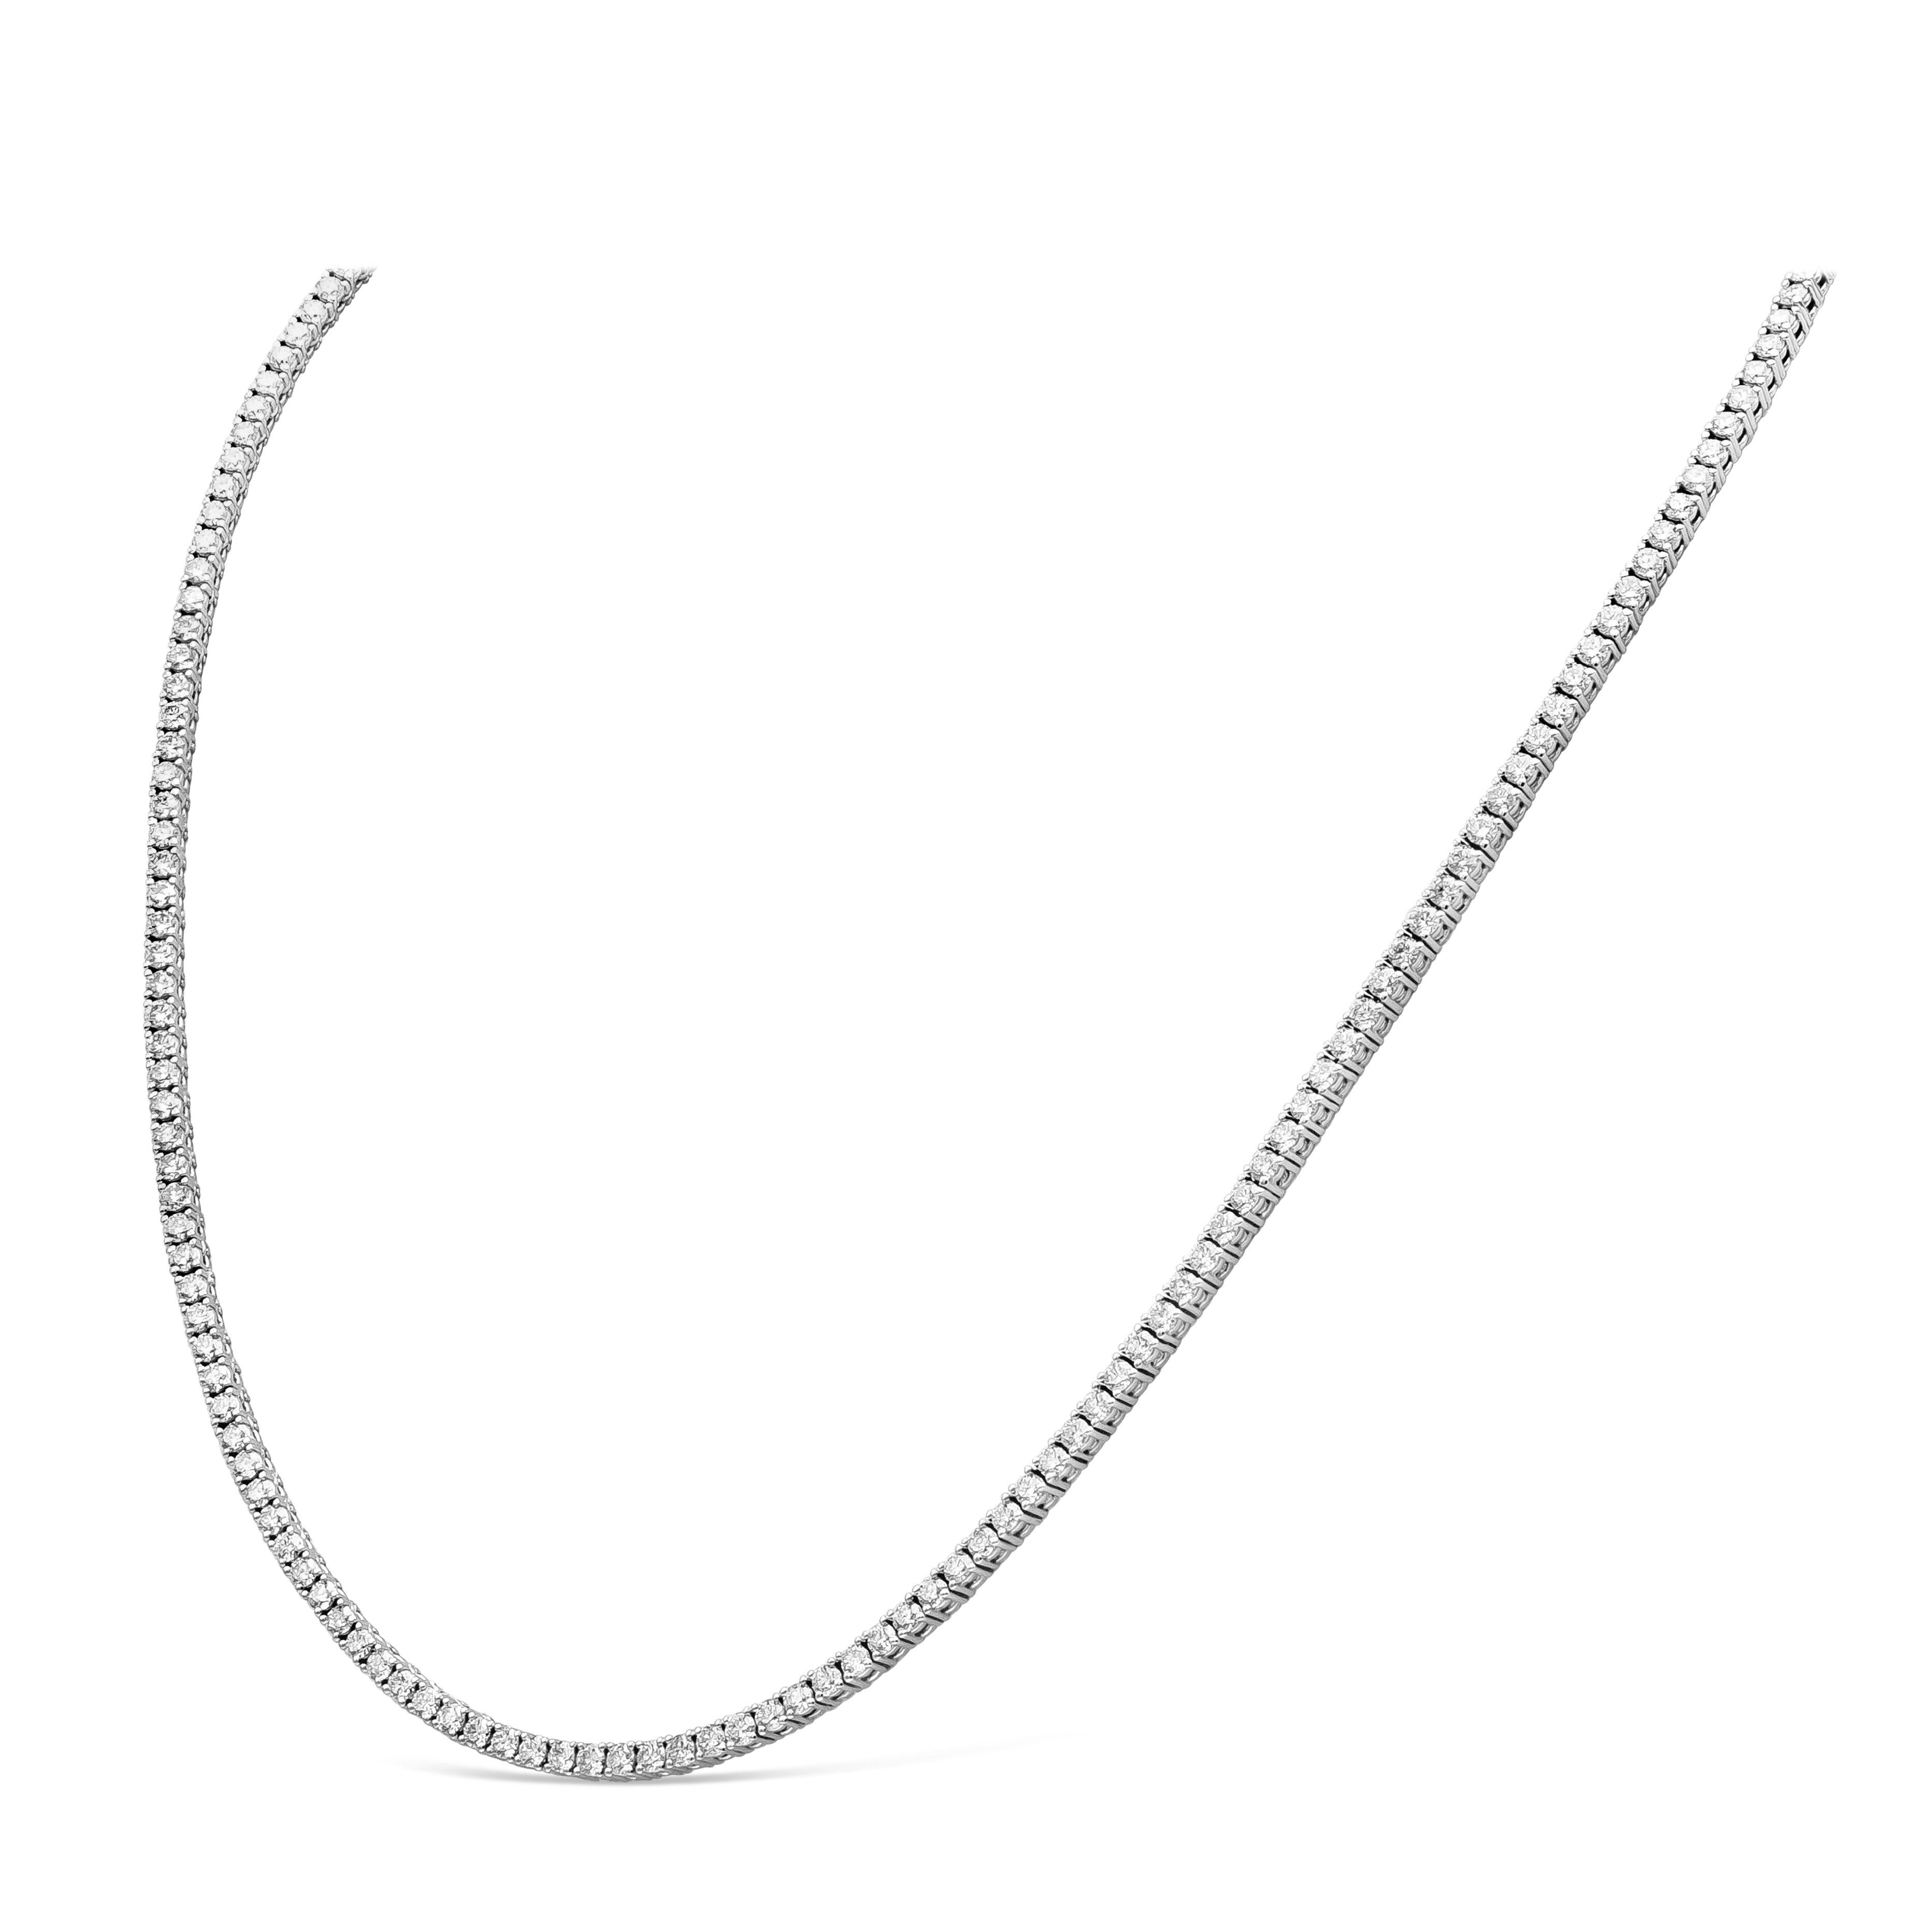 A classic tennis necklace style showcasing 192 round brilliant diamonds, set in a polished 18k white gold setting. Diamonds weigh 7.30 carats total and are approximately F color, VS-SI clarity. 18 inches in Length.

Roman Malakov is a custom house,